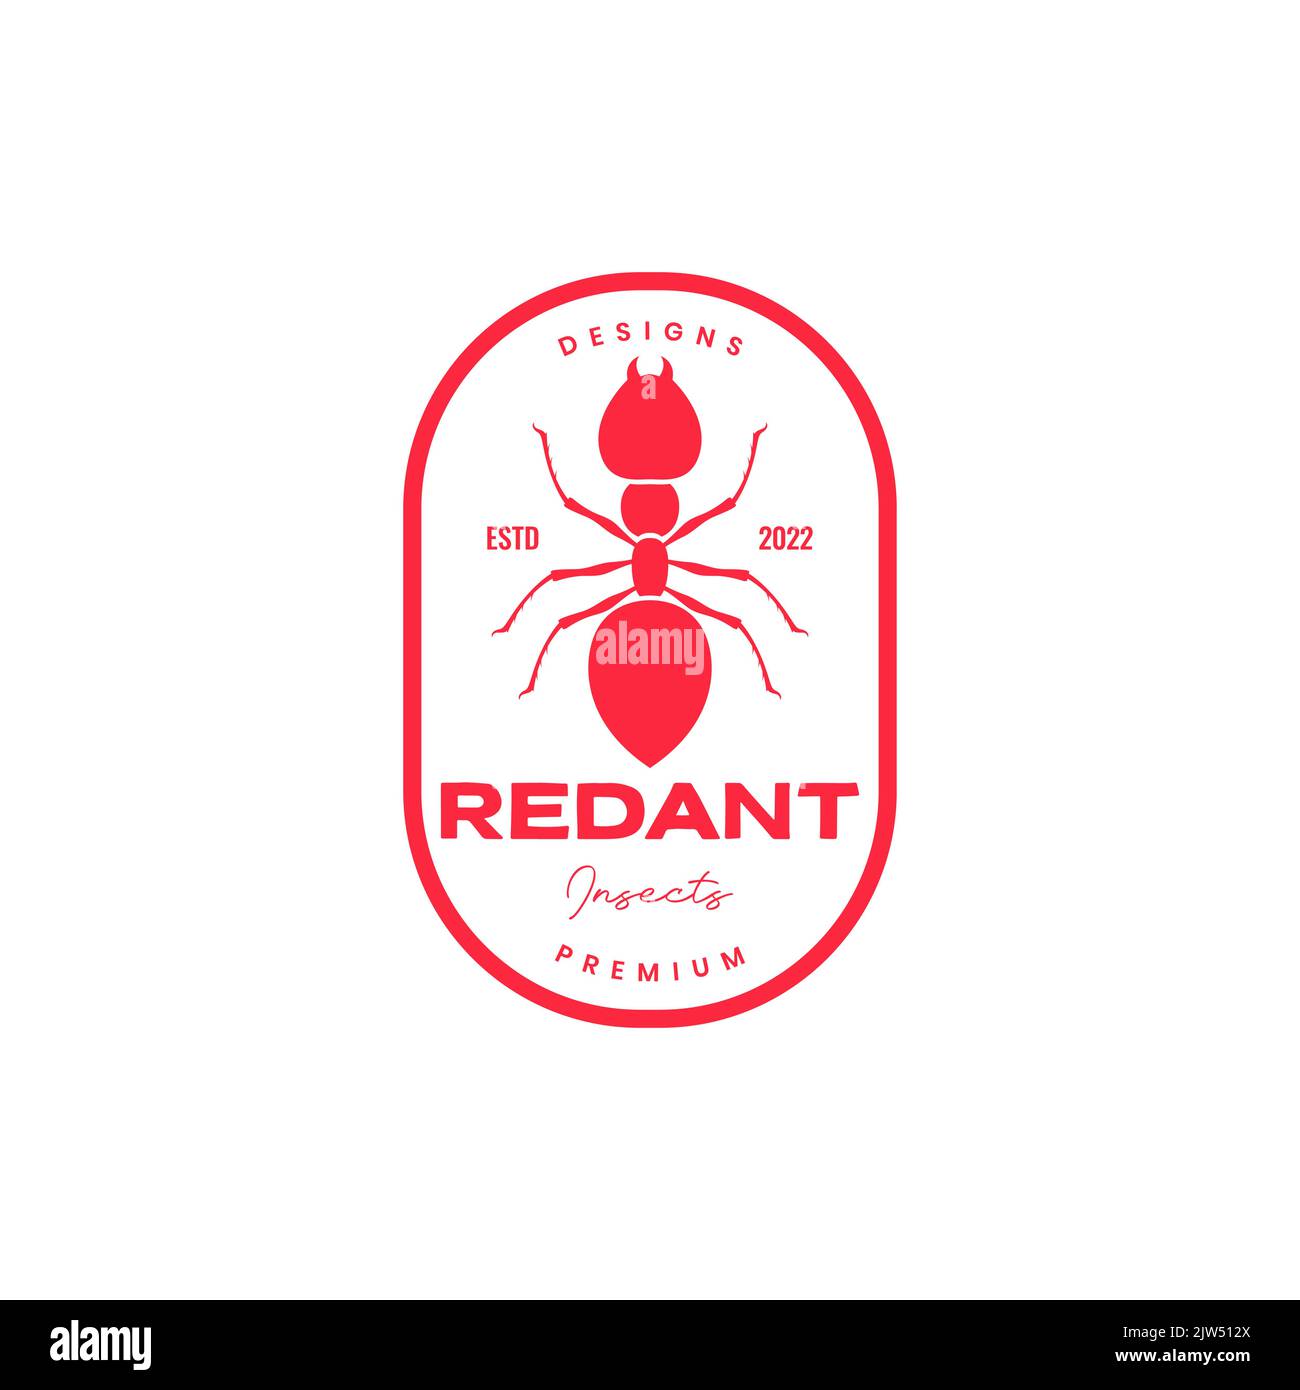 red ant colored vintage logo design Stock Vector